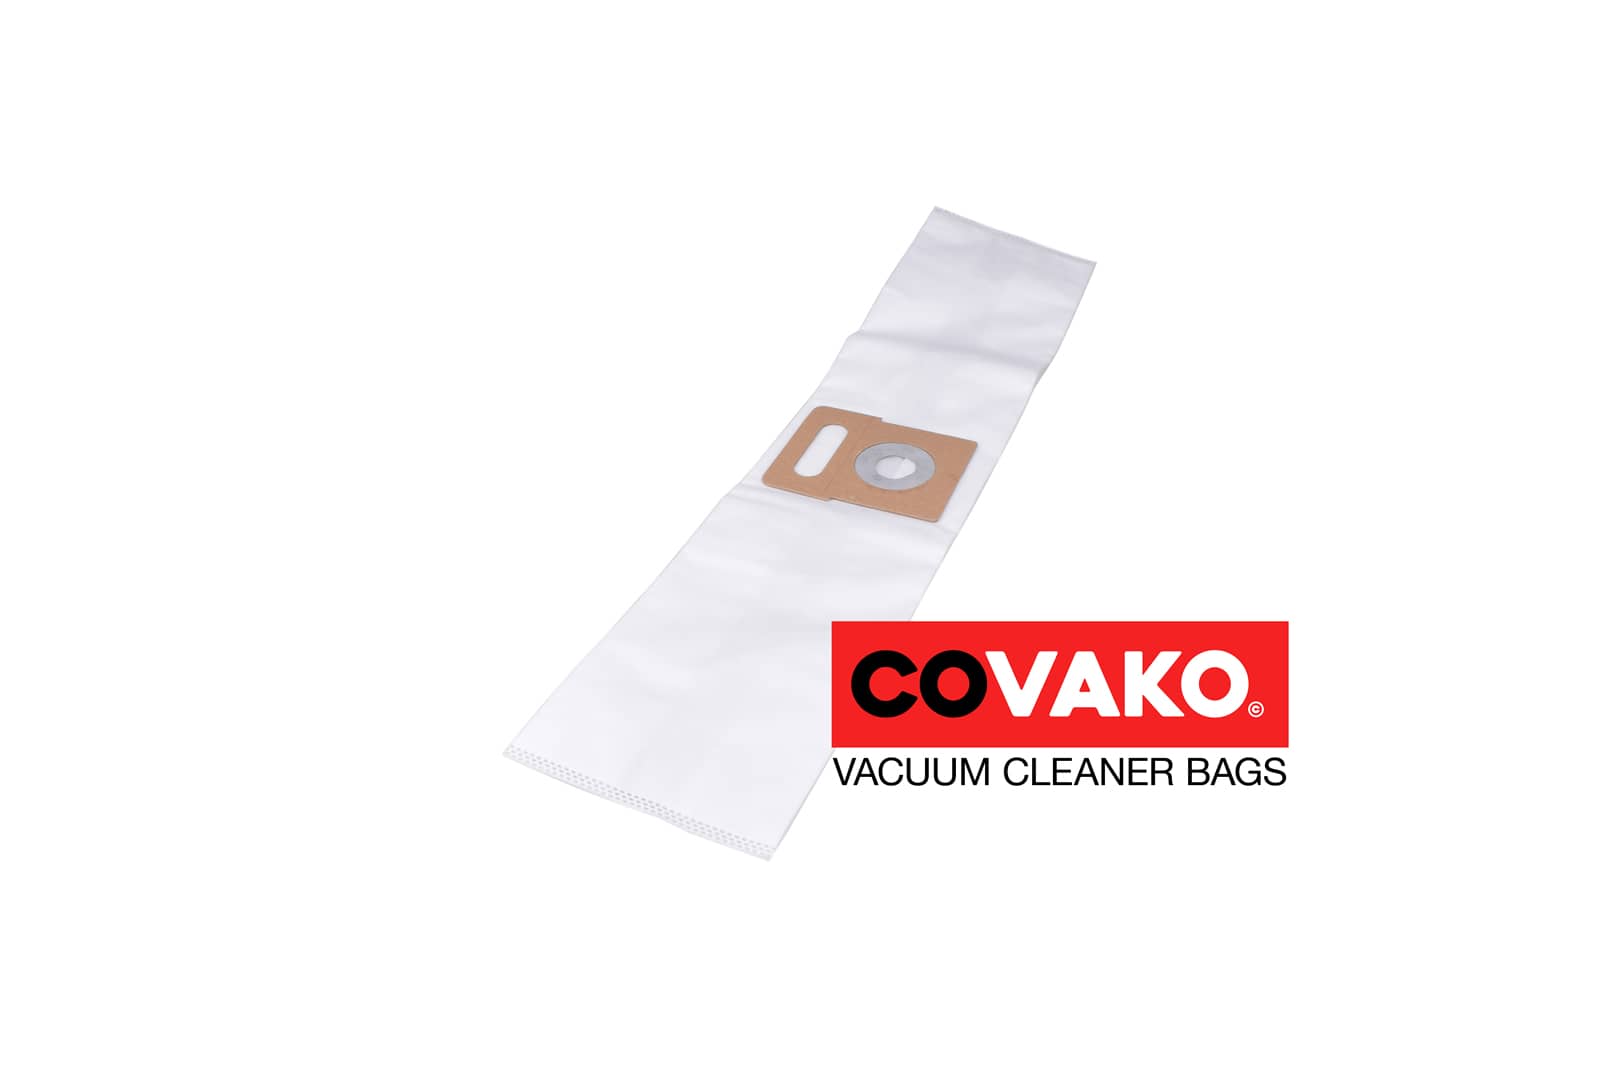 Ivac 643533 / Synthesis - Ivac vacuum cleaner bags